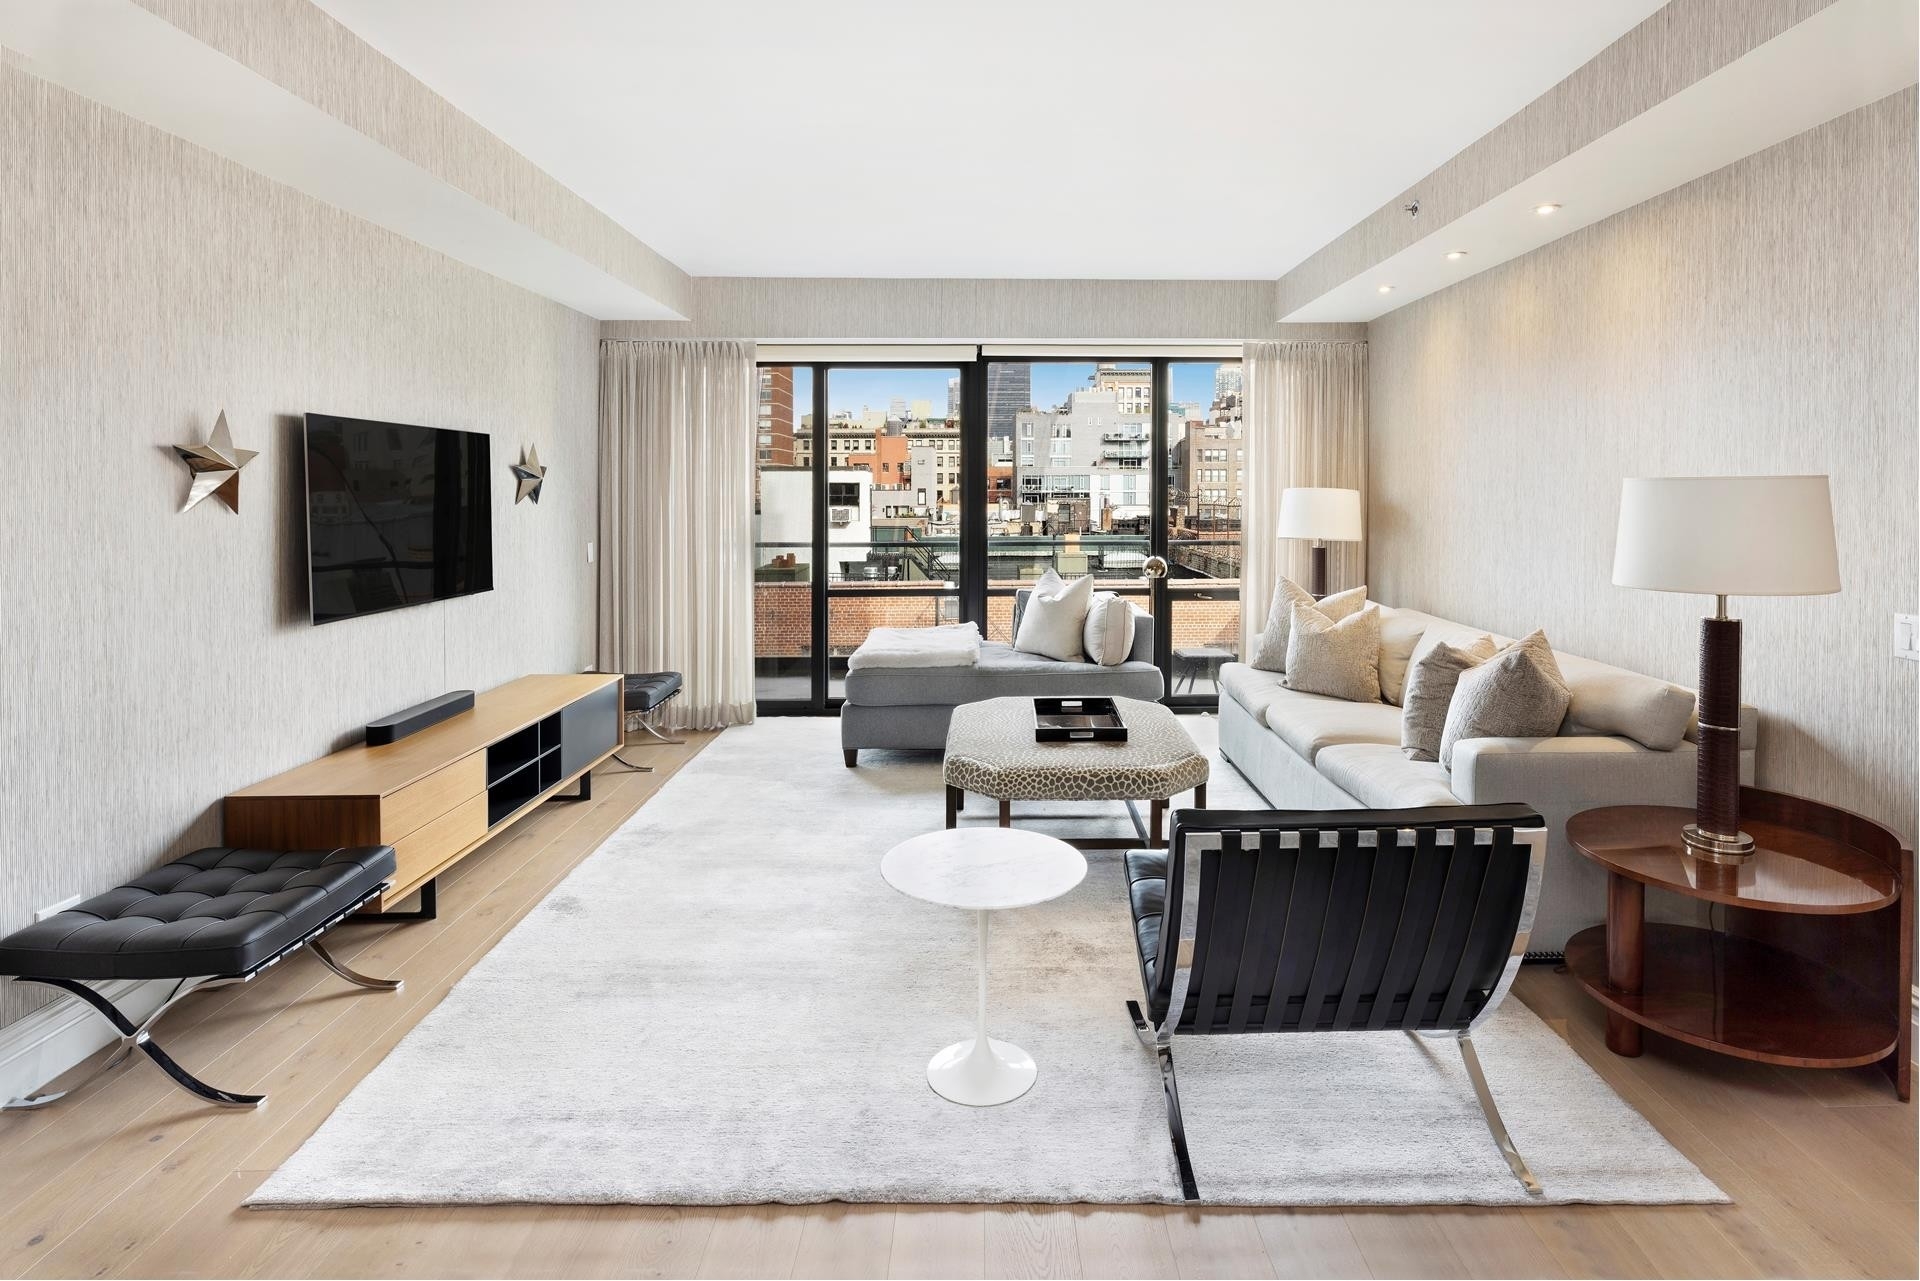 2. Condominiums for Sale at Village Green West, 245 W 14TH ST, 8B Chelsea, New York, New York 10011